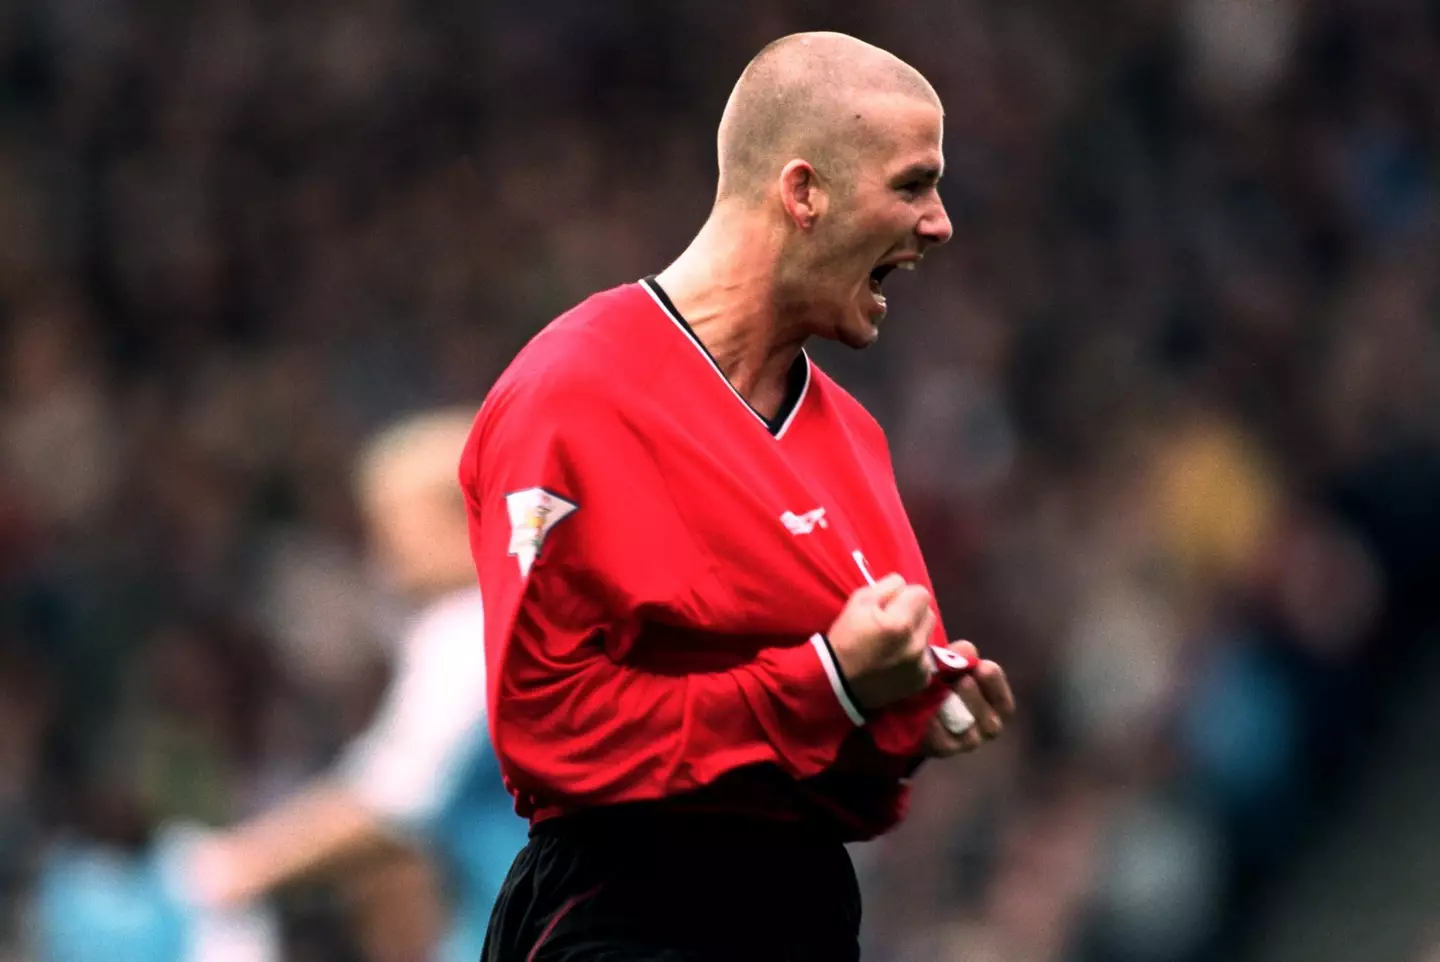 David Beckham celebrates after scoring a free-kick against Manchester City in 2000. (Alamy)